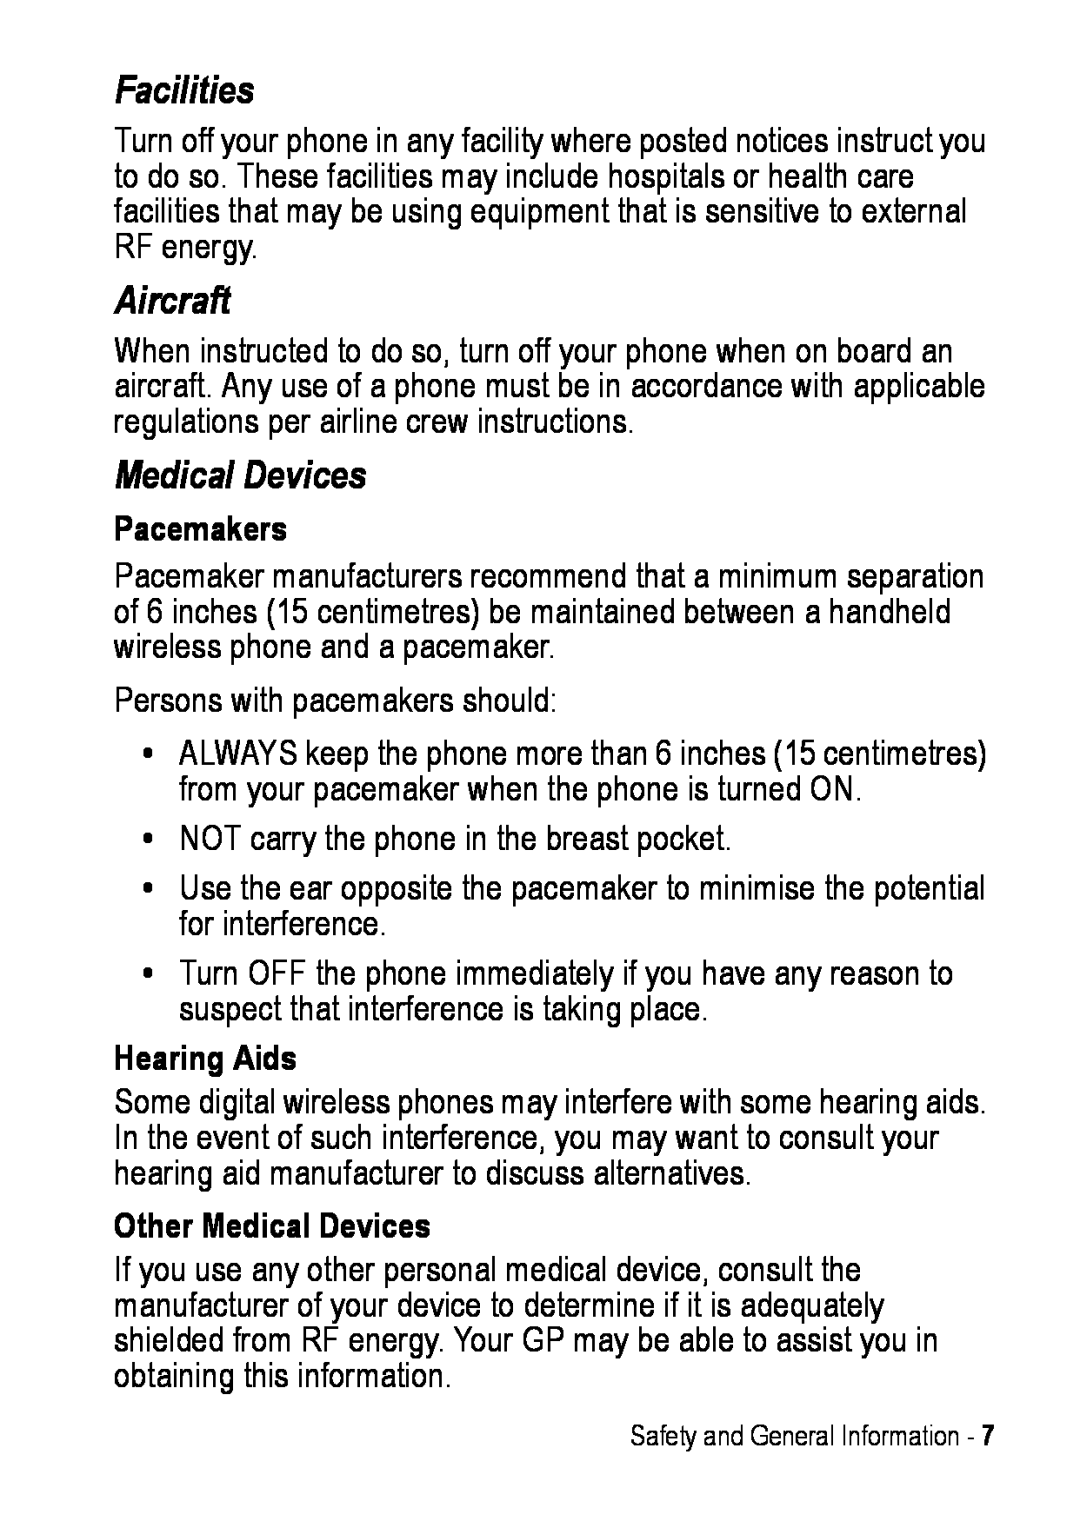 Motorola C390 manual Facilities, Aircraft, Pacemakers, Hearing Aids, Other Medical Devices 